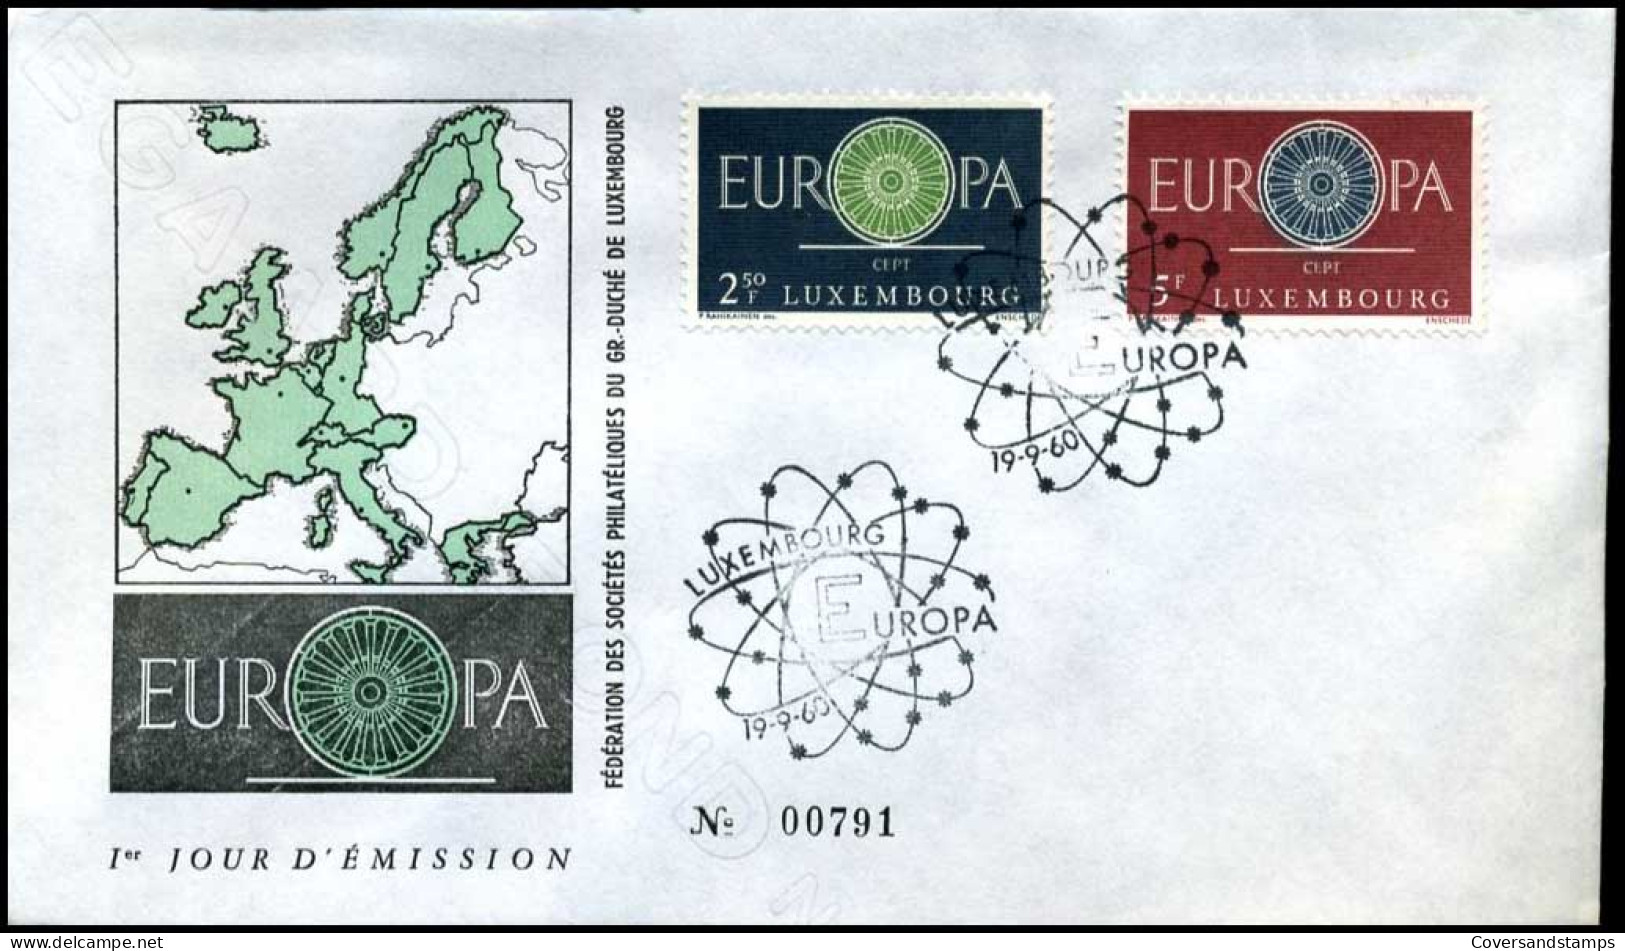  Luxembourg - FDC - Europa CEPT 1960 - 1960